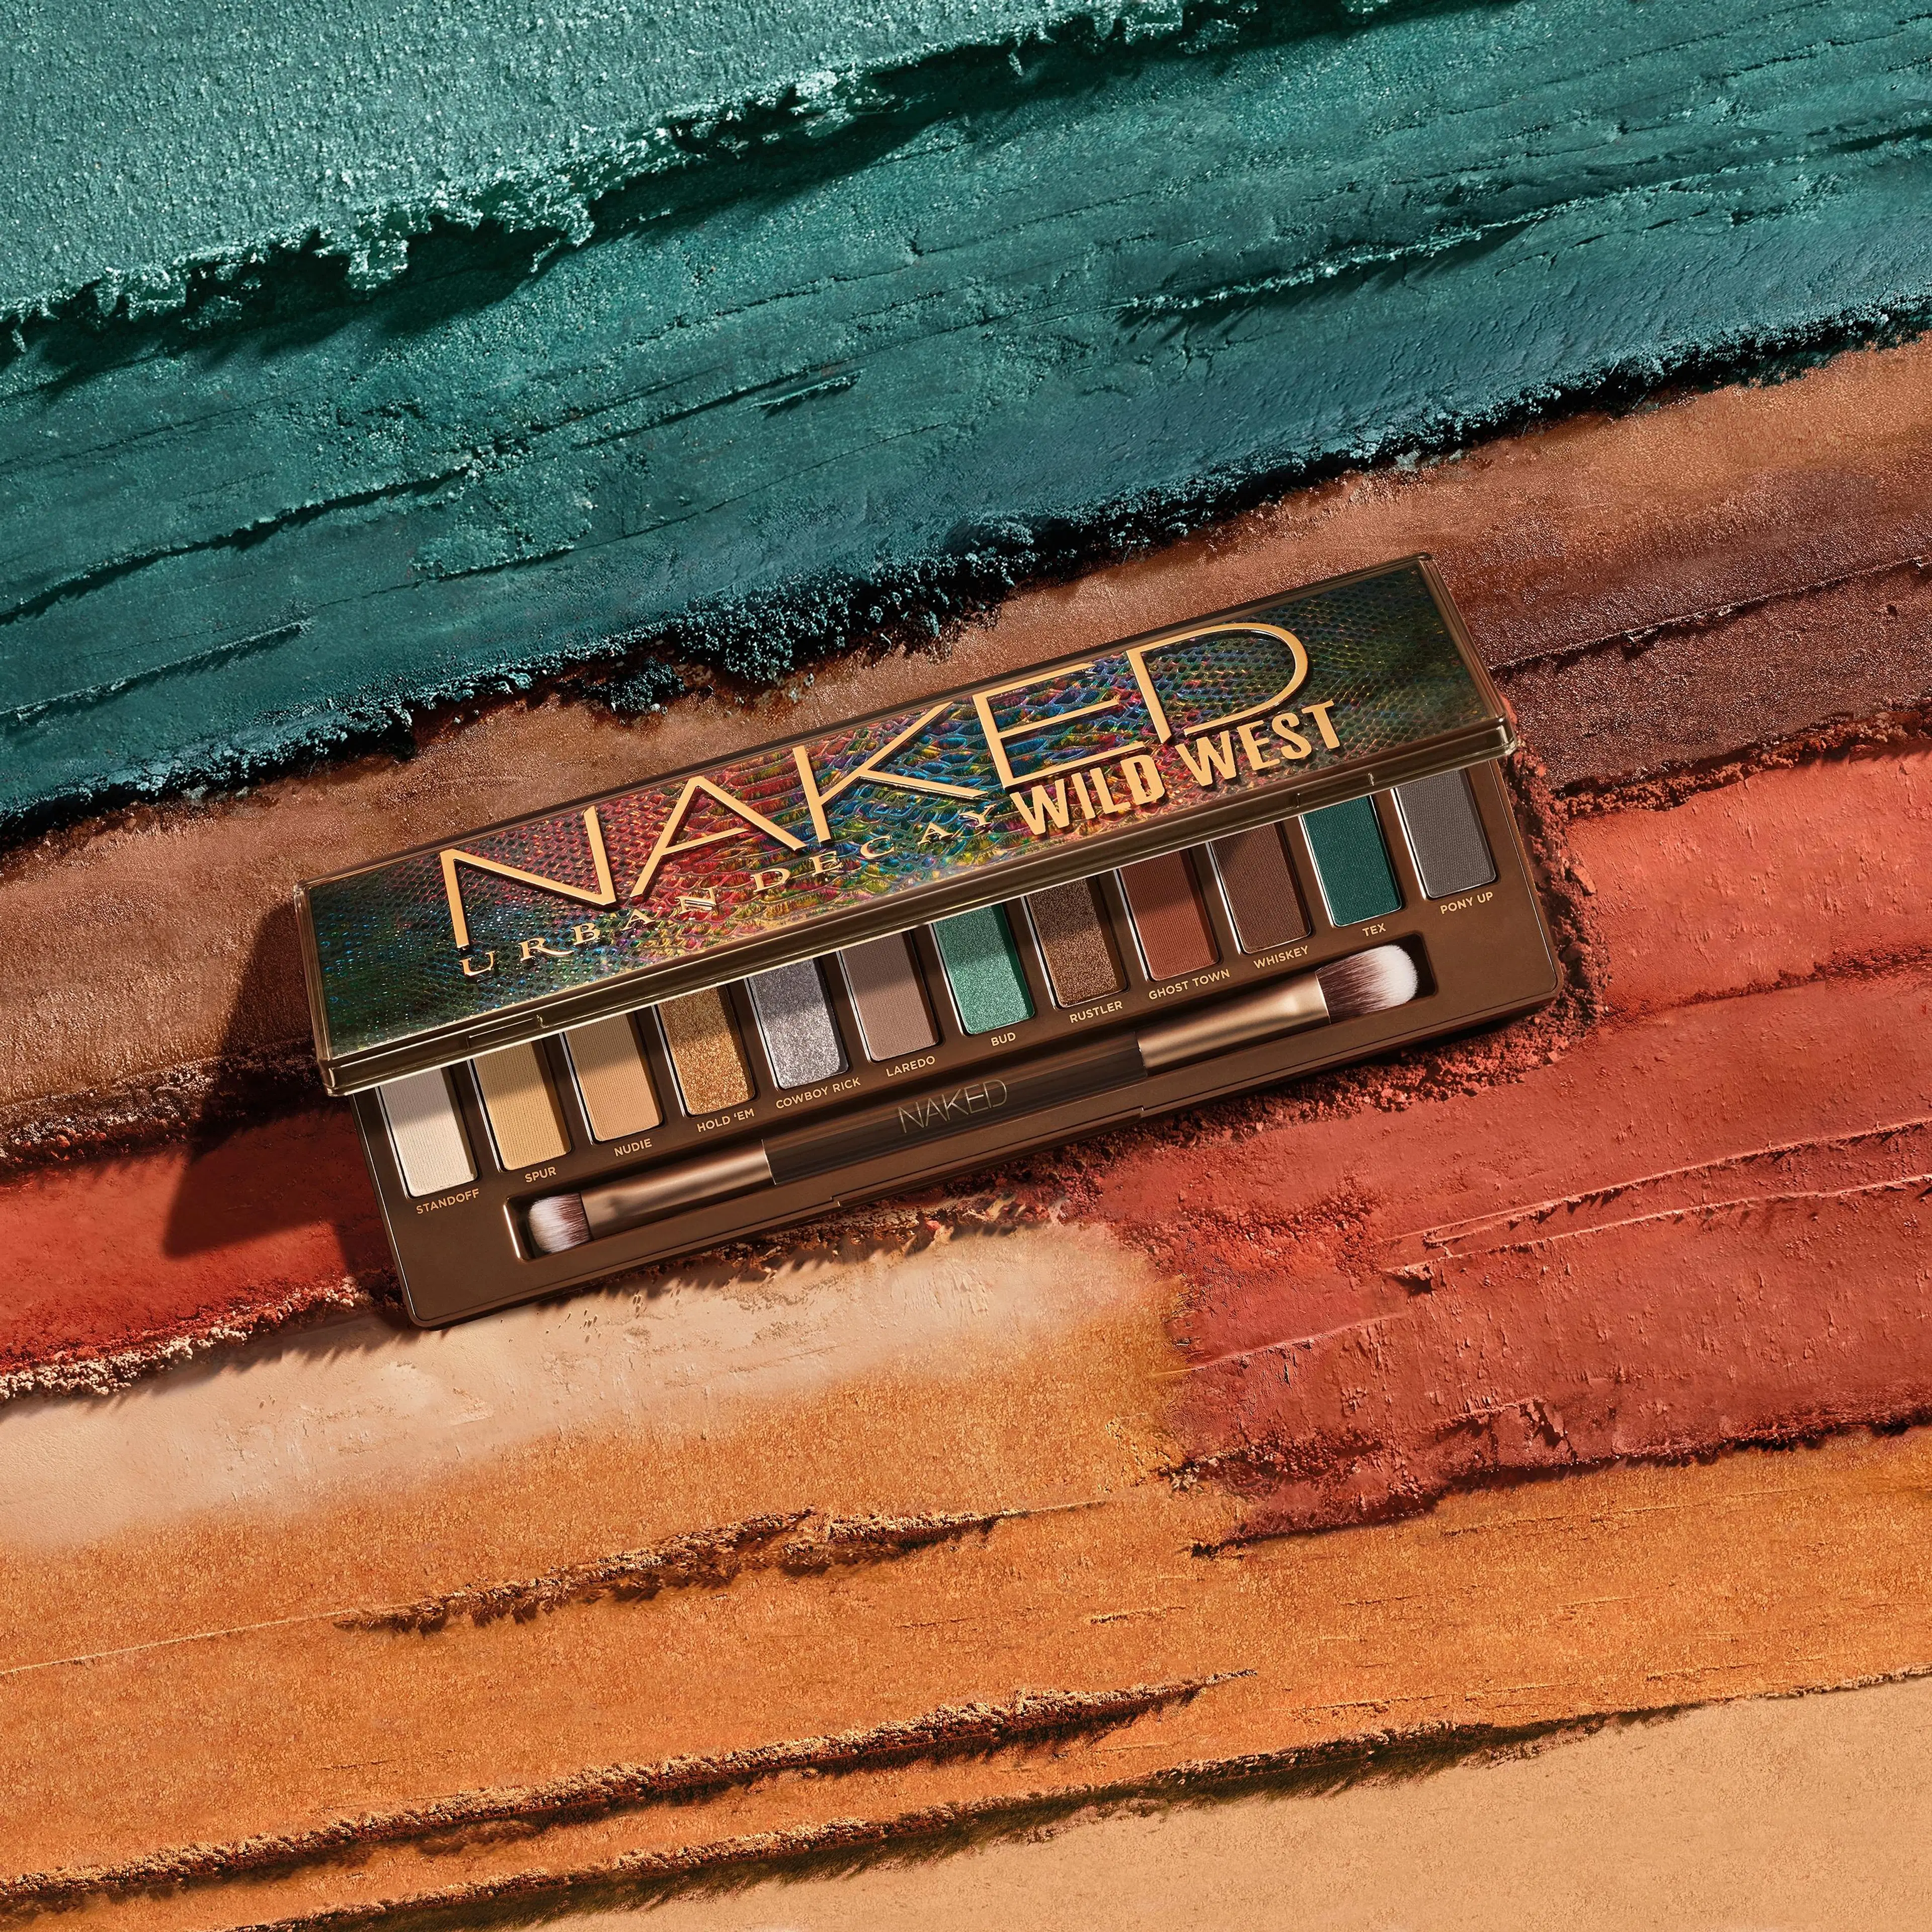 Urban Decay Naked Wild West Eyeshadow Palette luomiväripaletti